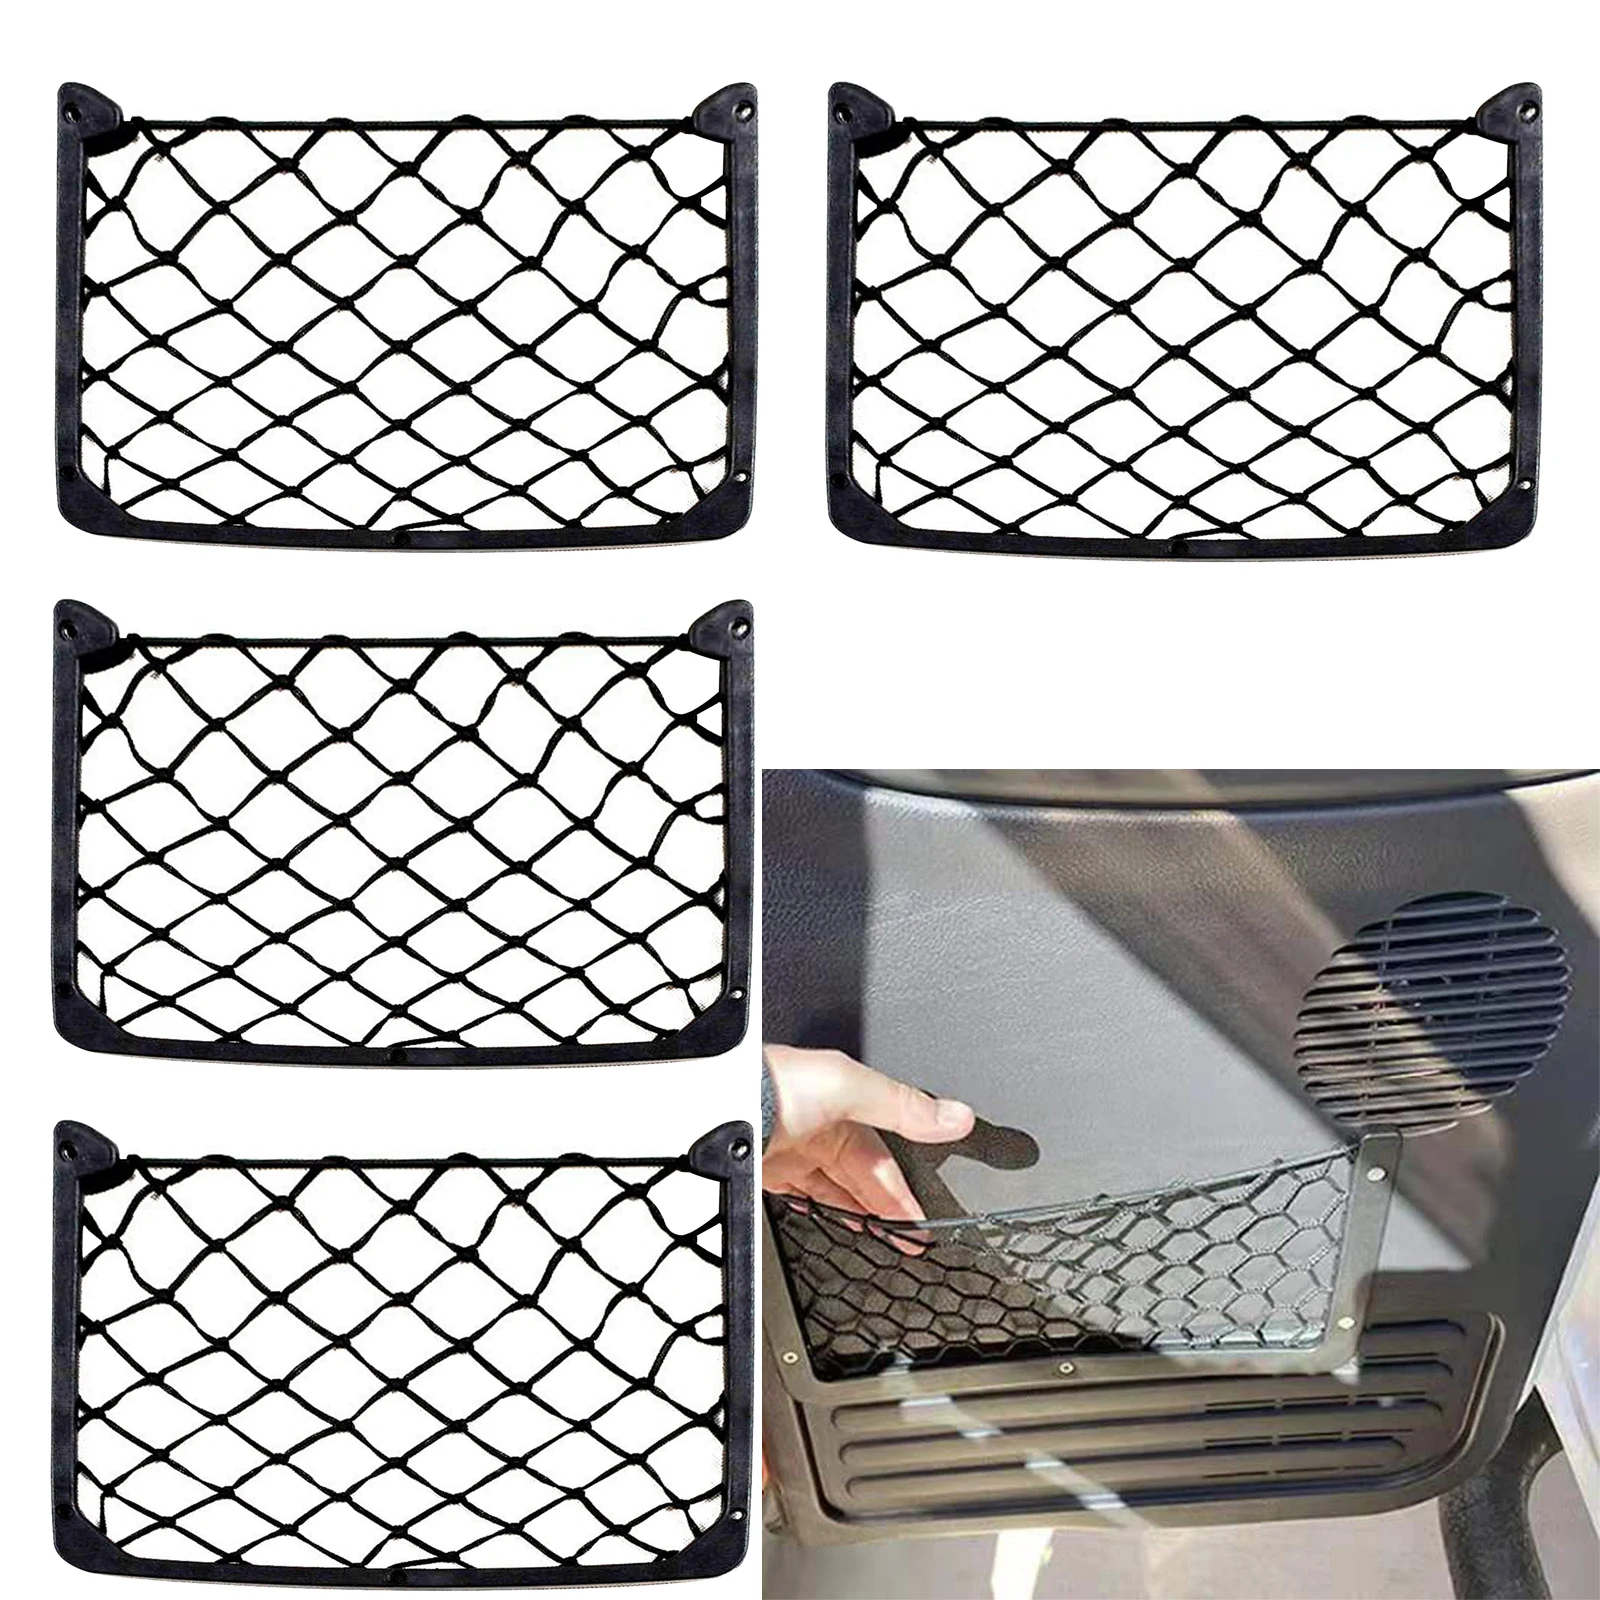 Car Storage Net Large Size ABS Plastic Netting Bag for Car Frame Stretch Mesh Net Universal Cargo with Screws for RV Car Trunk 1pcs gas lens connector gas lens connector w mesh tig wp 17 18 26 torch welding universal high quality repalcement